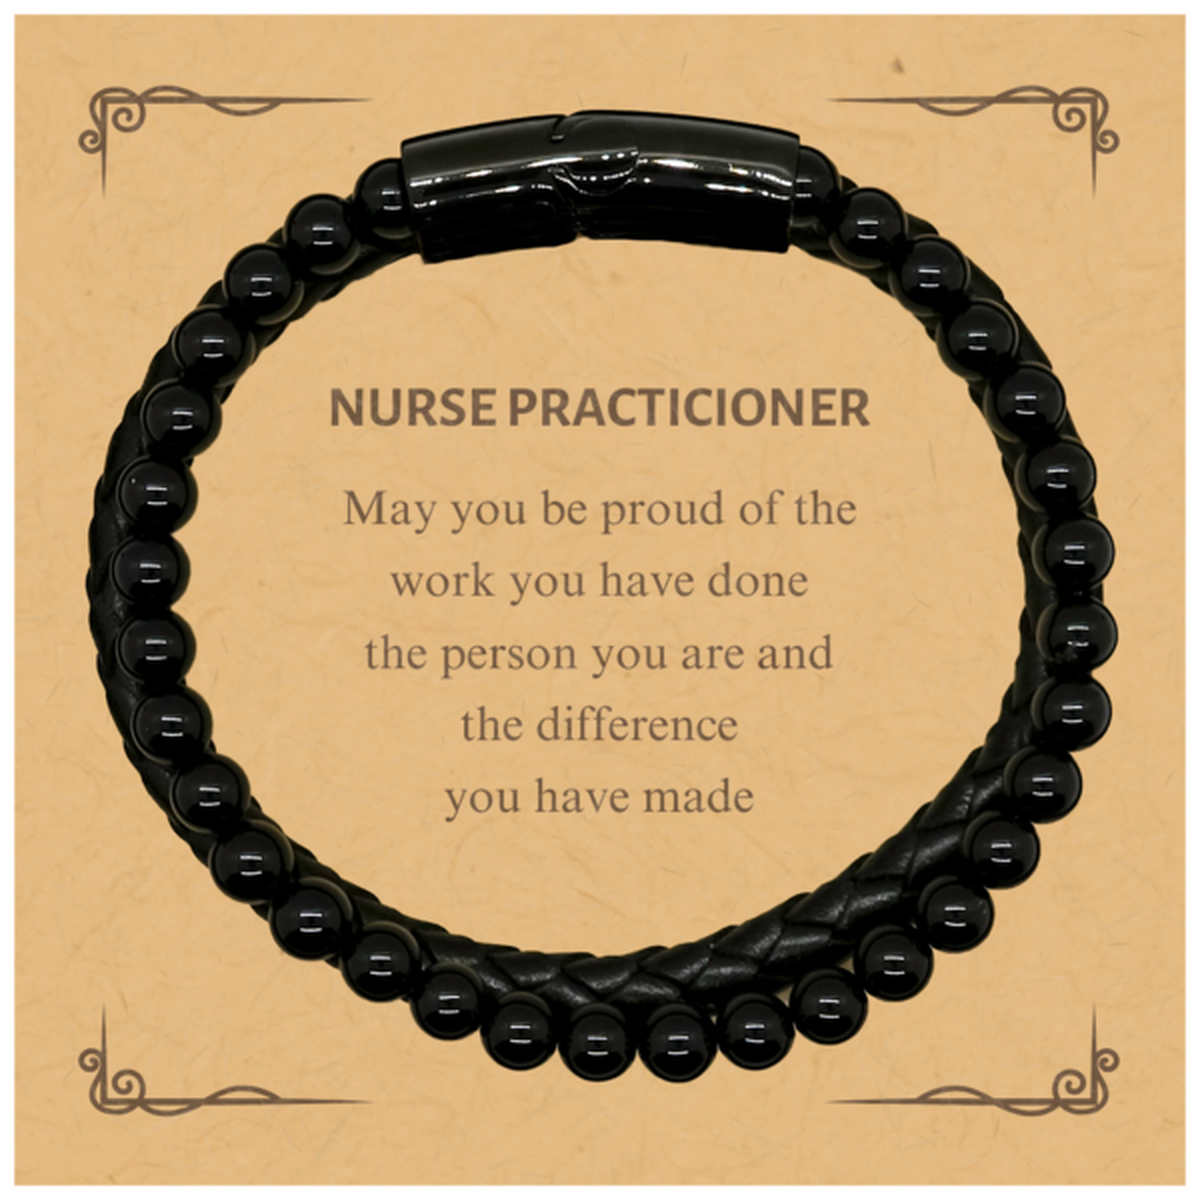 Nurse Practicioner May you be proud of the work you have done, Retirement Nurse Practicioner Stone Leather Bracelets for Colleague Appreciation Gifts Amazing for Nurse Practicioner